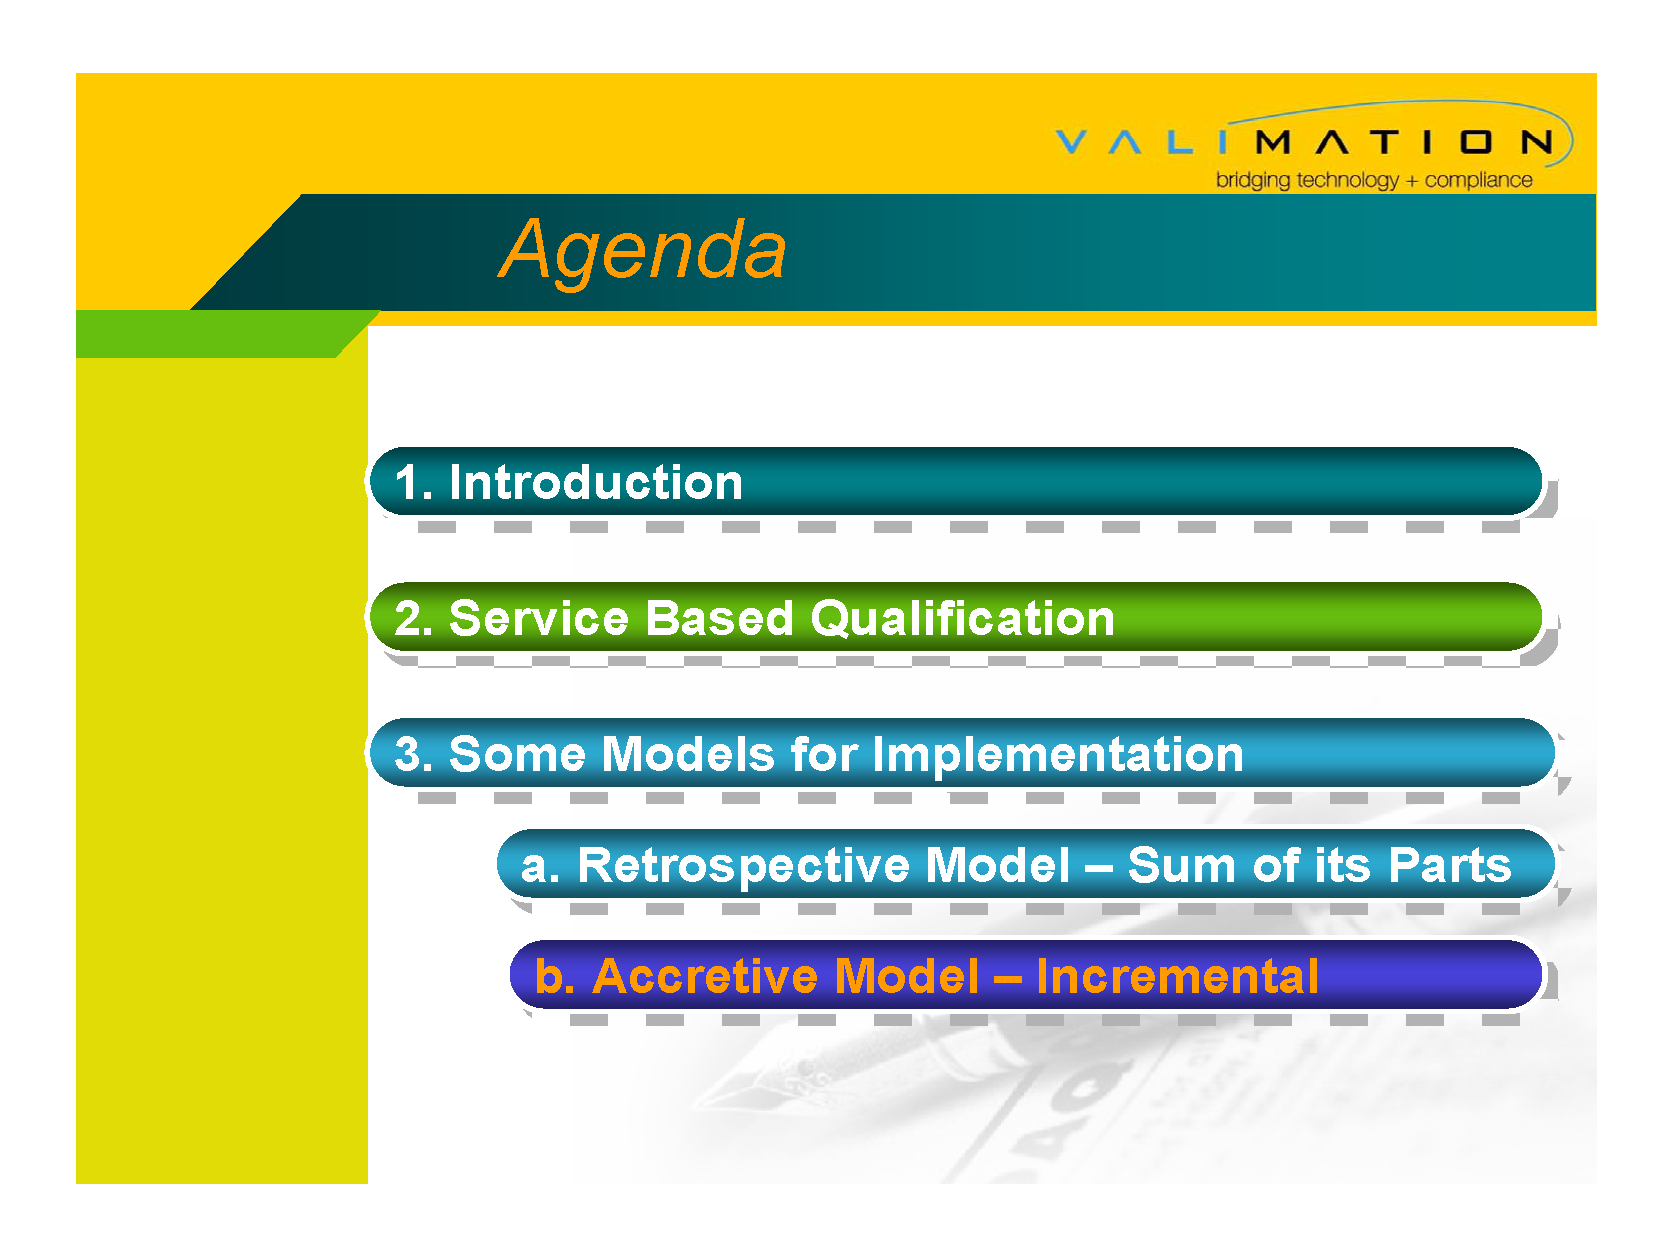 Network Qualification - Accretive Model By ValiMation_Page_21.png